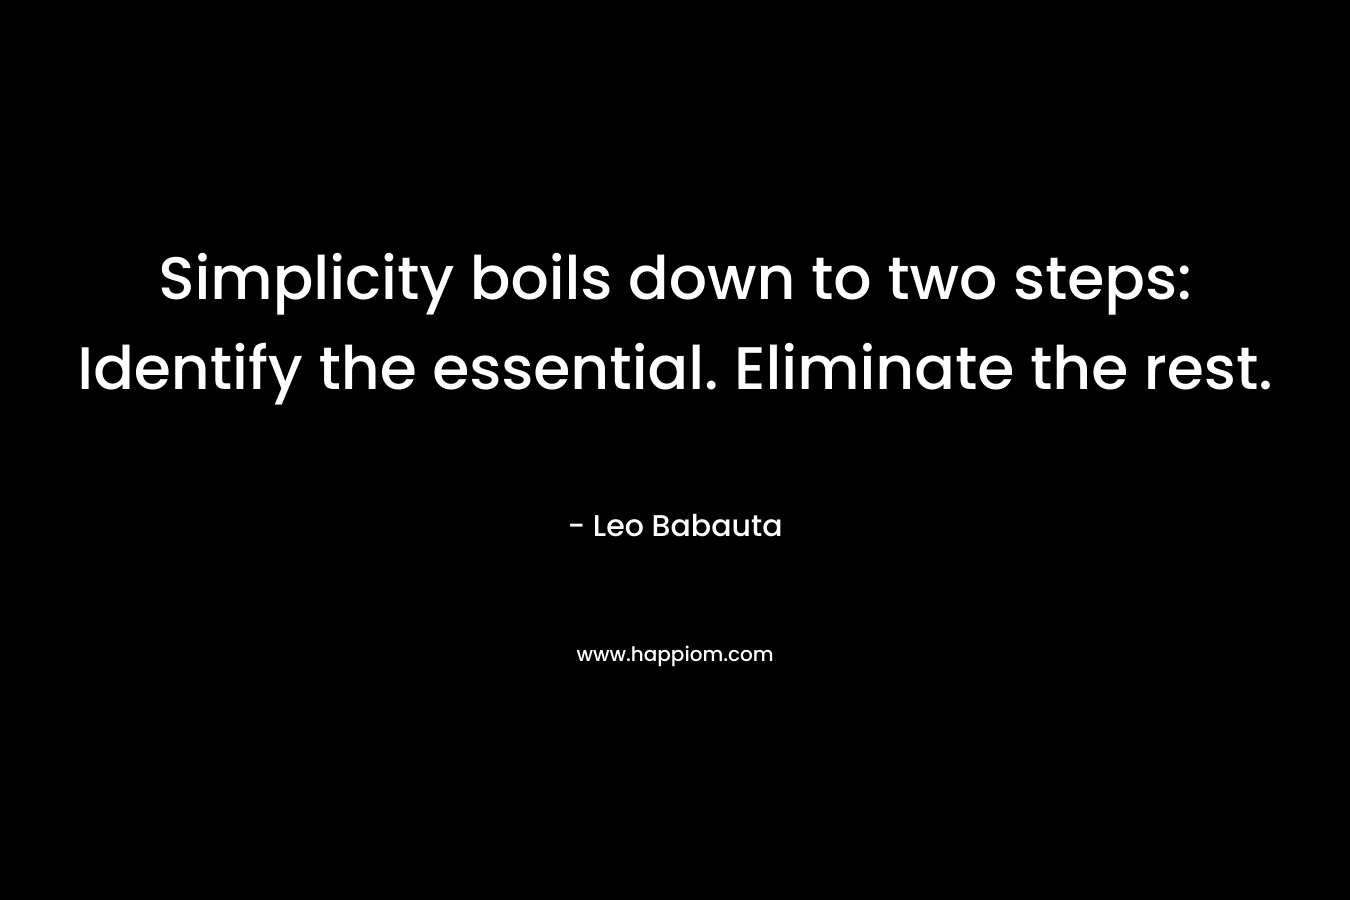 Simplicity boils down to two steps: Identify the essential. Eliminate the rest. – Leo Babauta